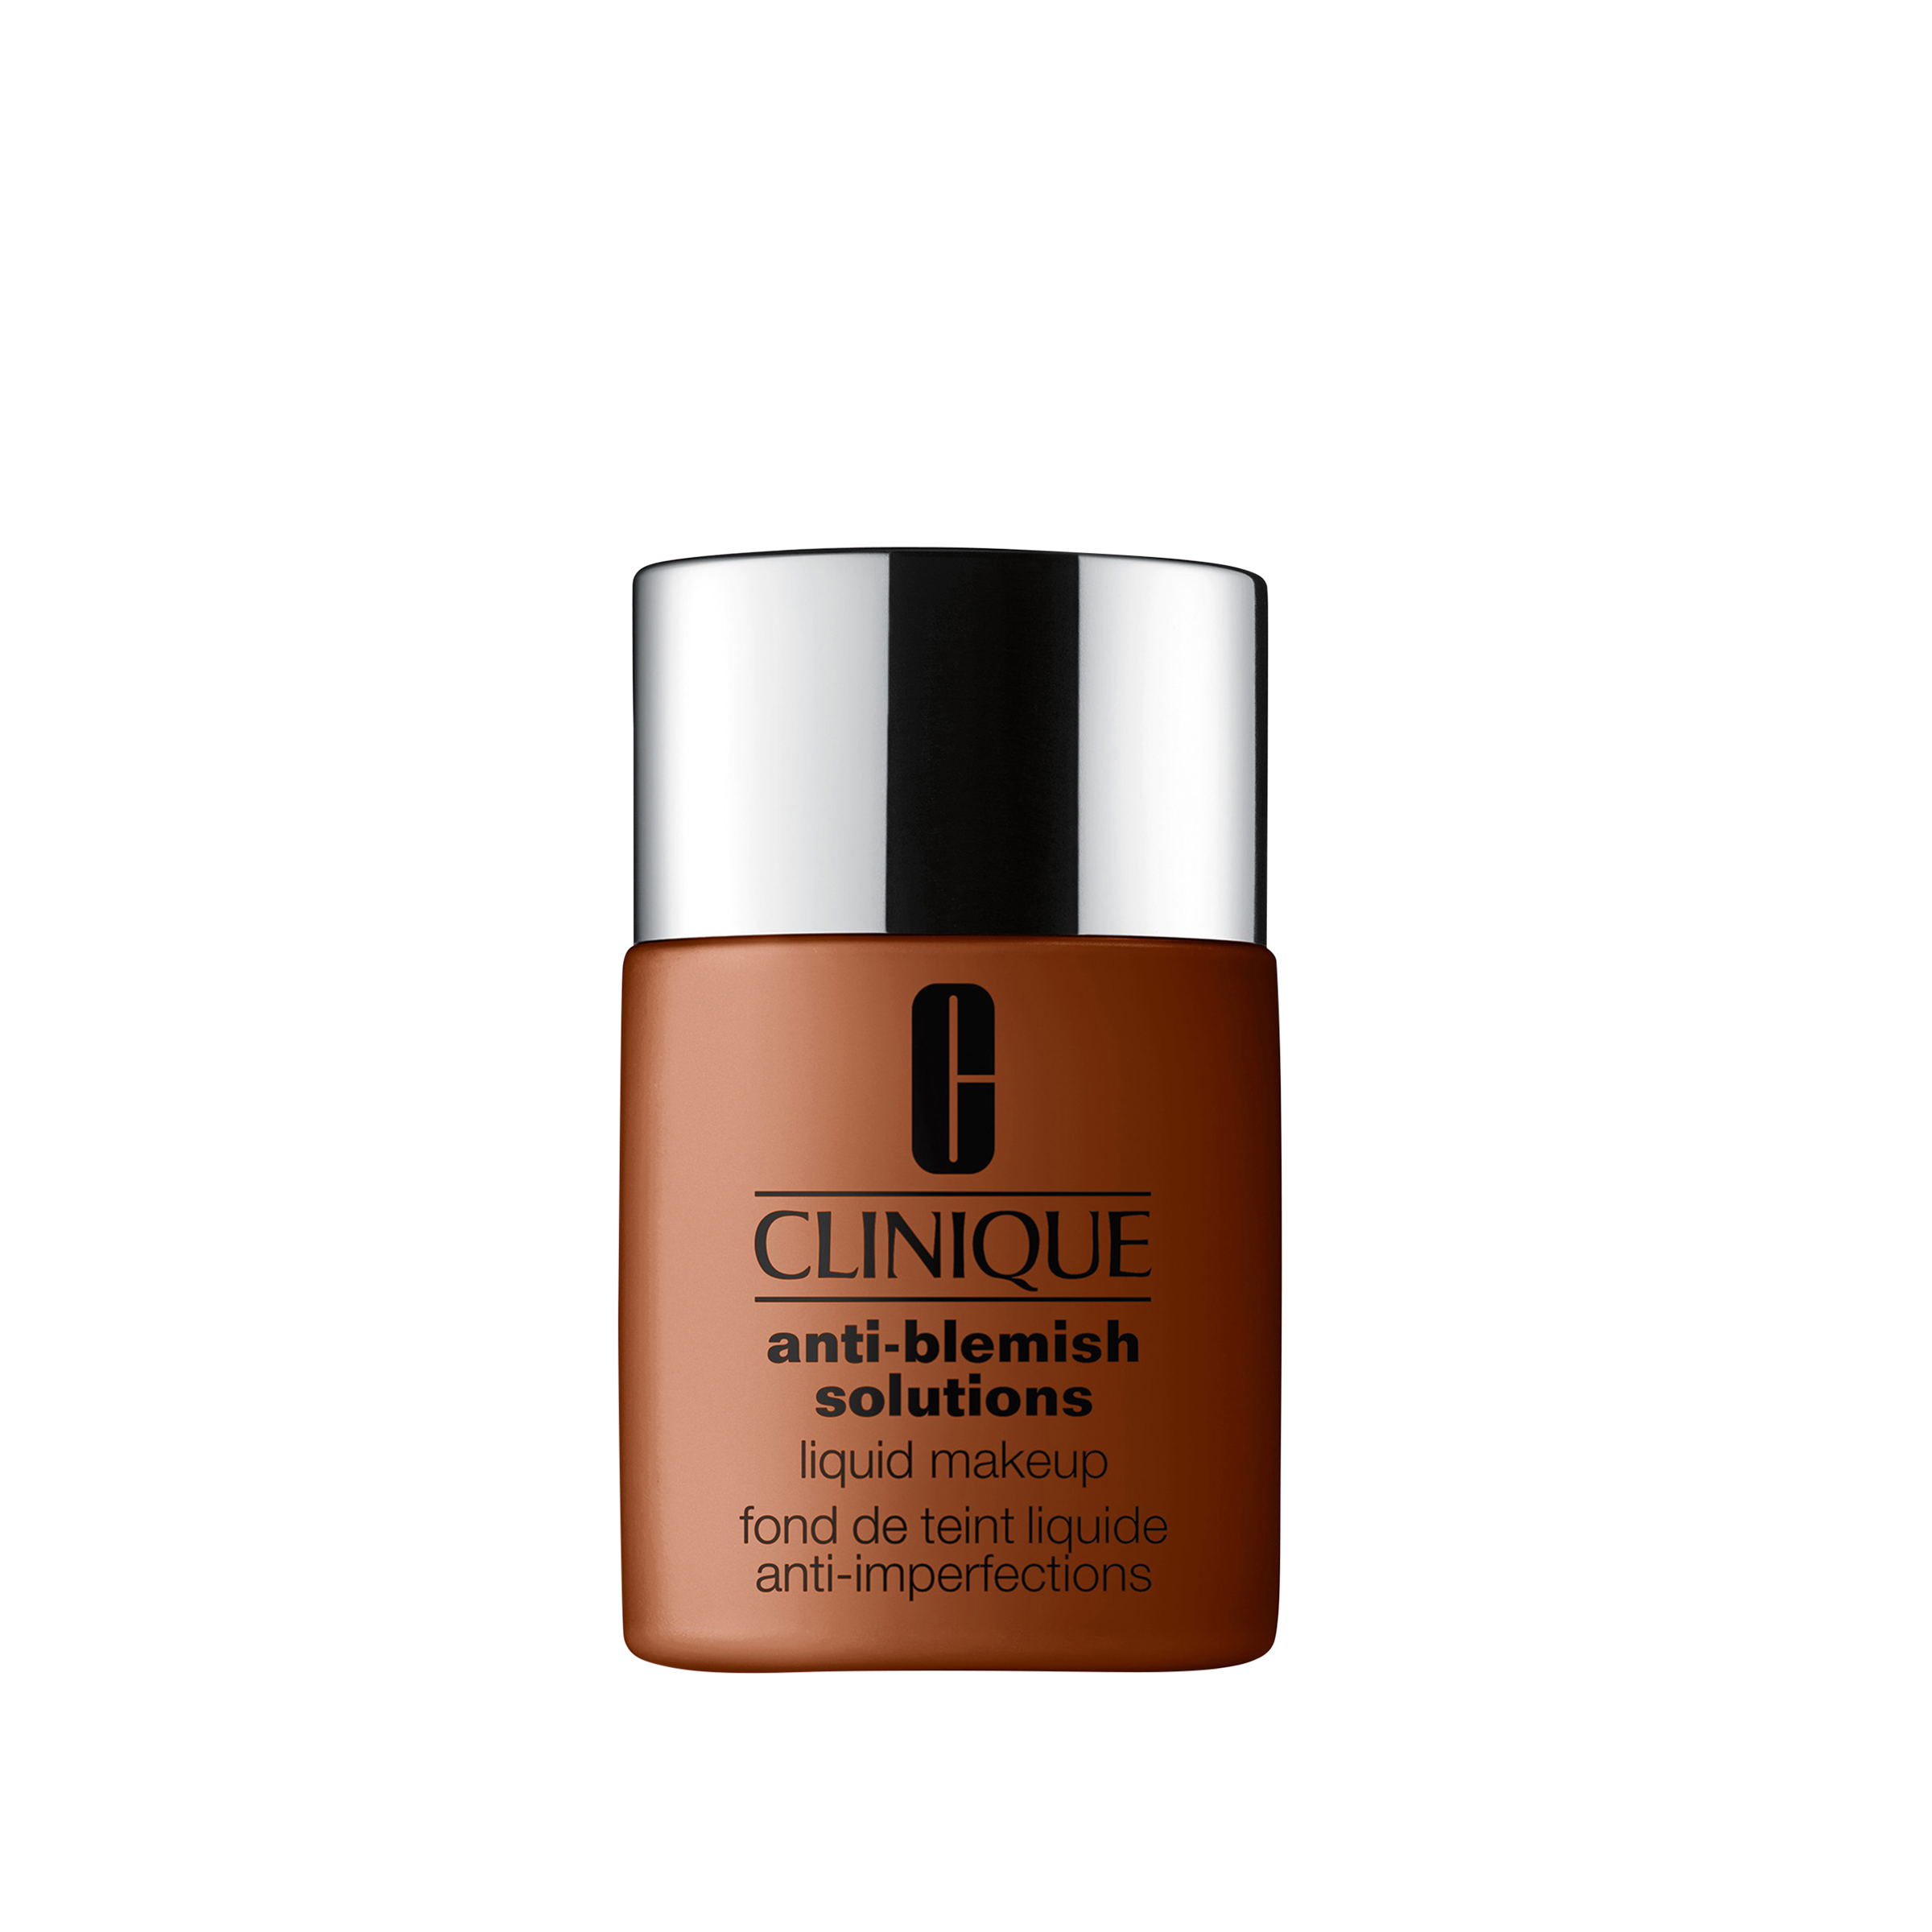 clinique anti-blemish solutions liquid makeup with salicylic acid 30ml (various shades) - wn 122 clove